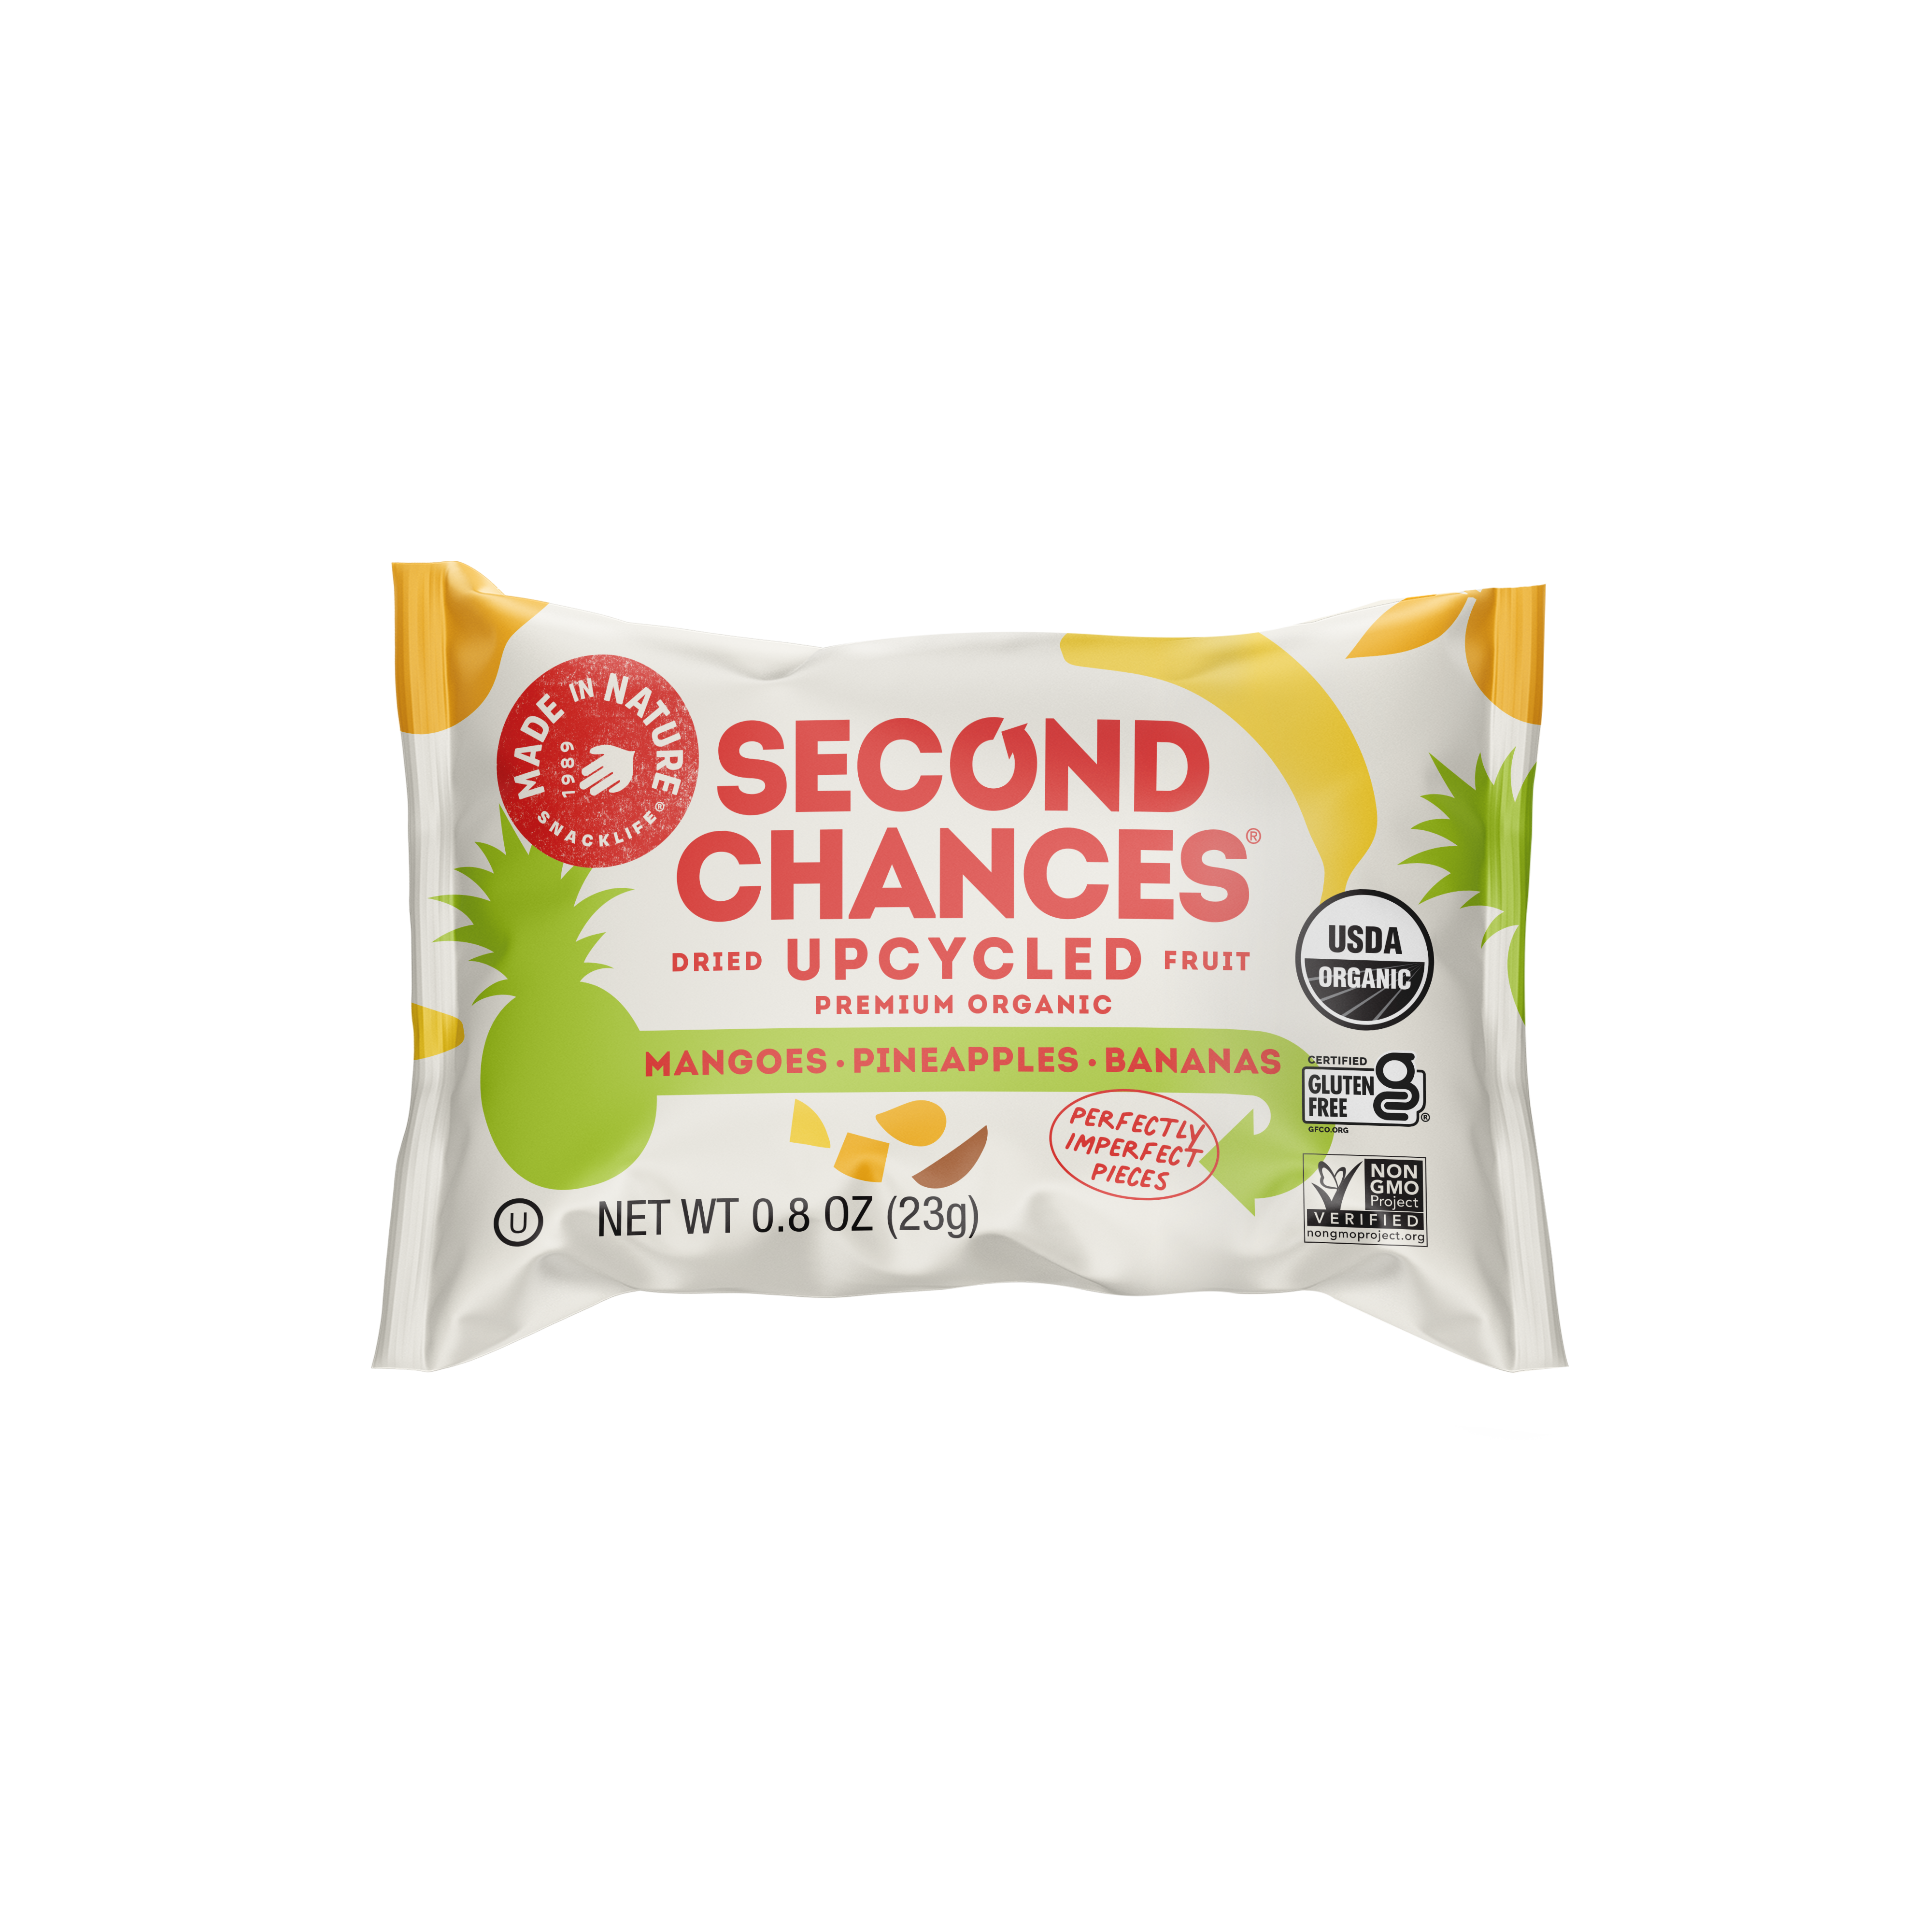 Second Chances Mangoes, Pineapples & Bananas